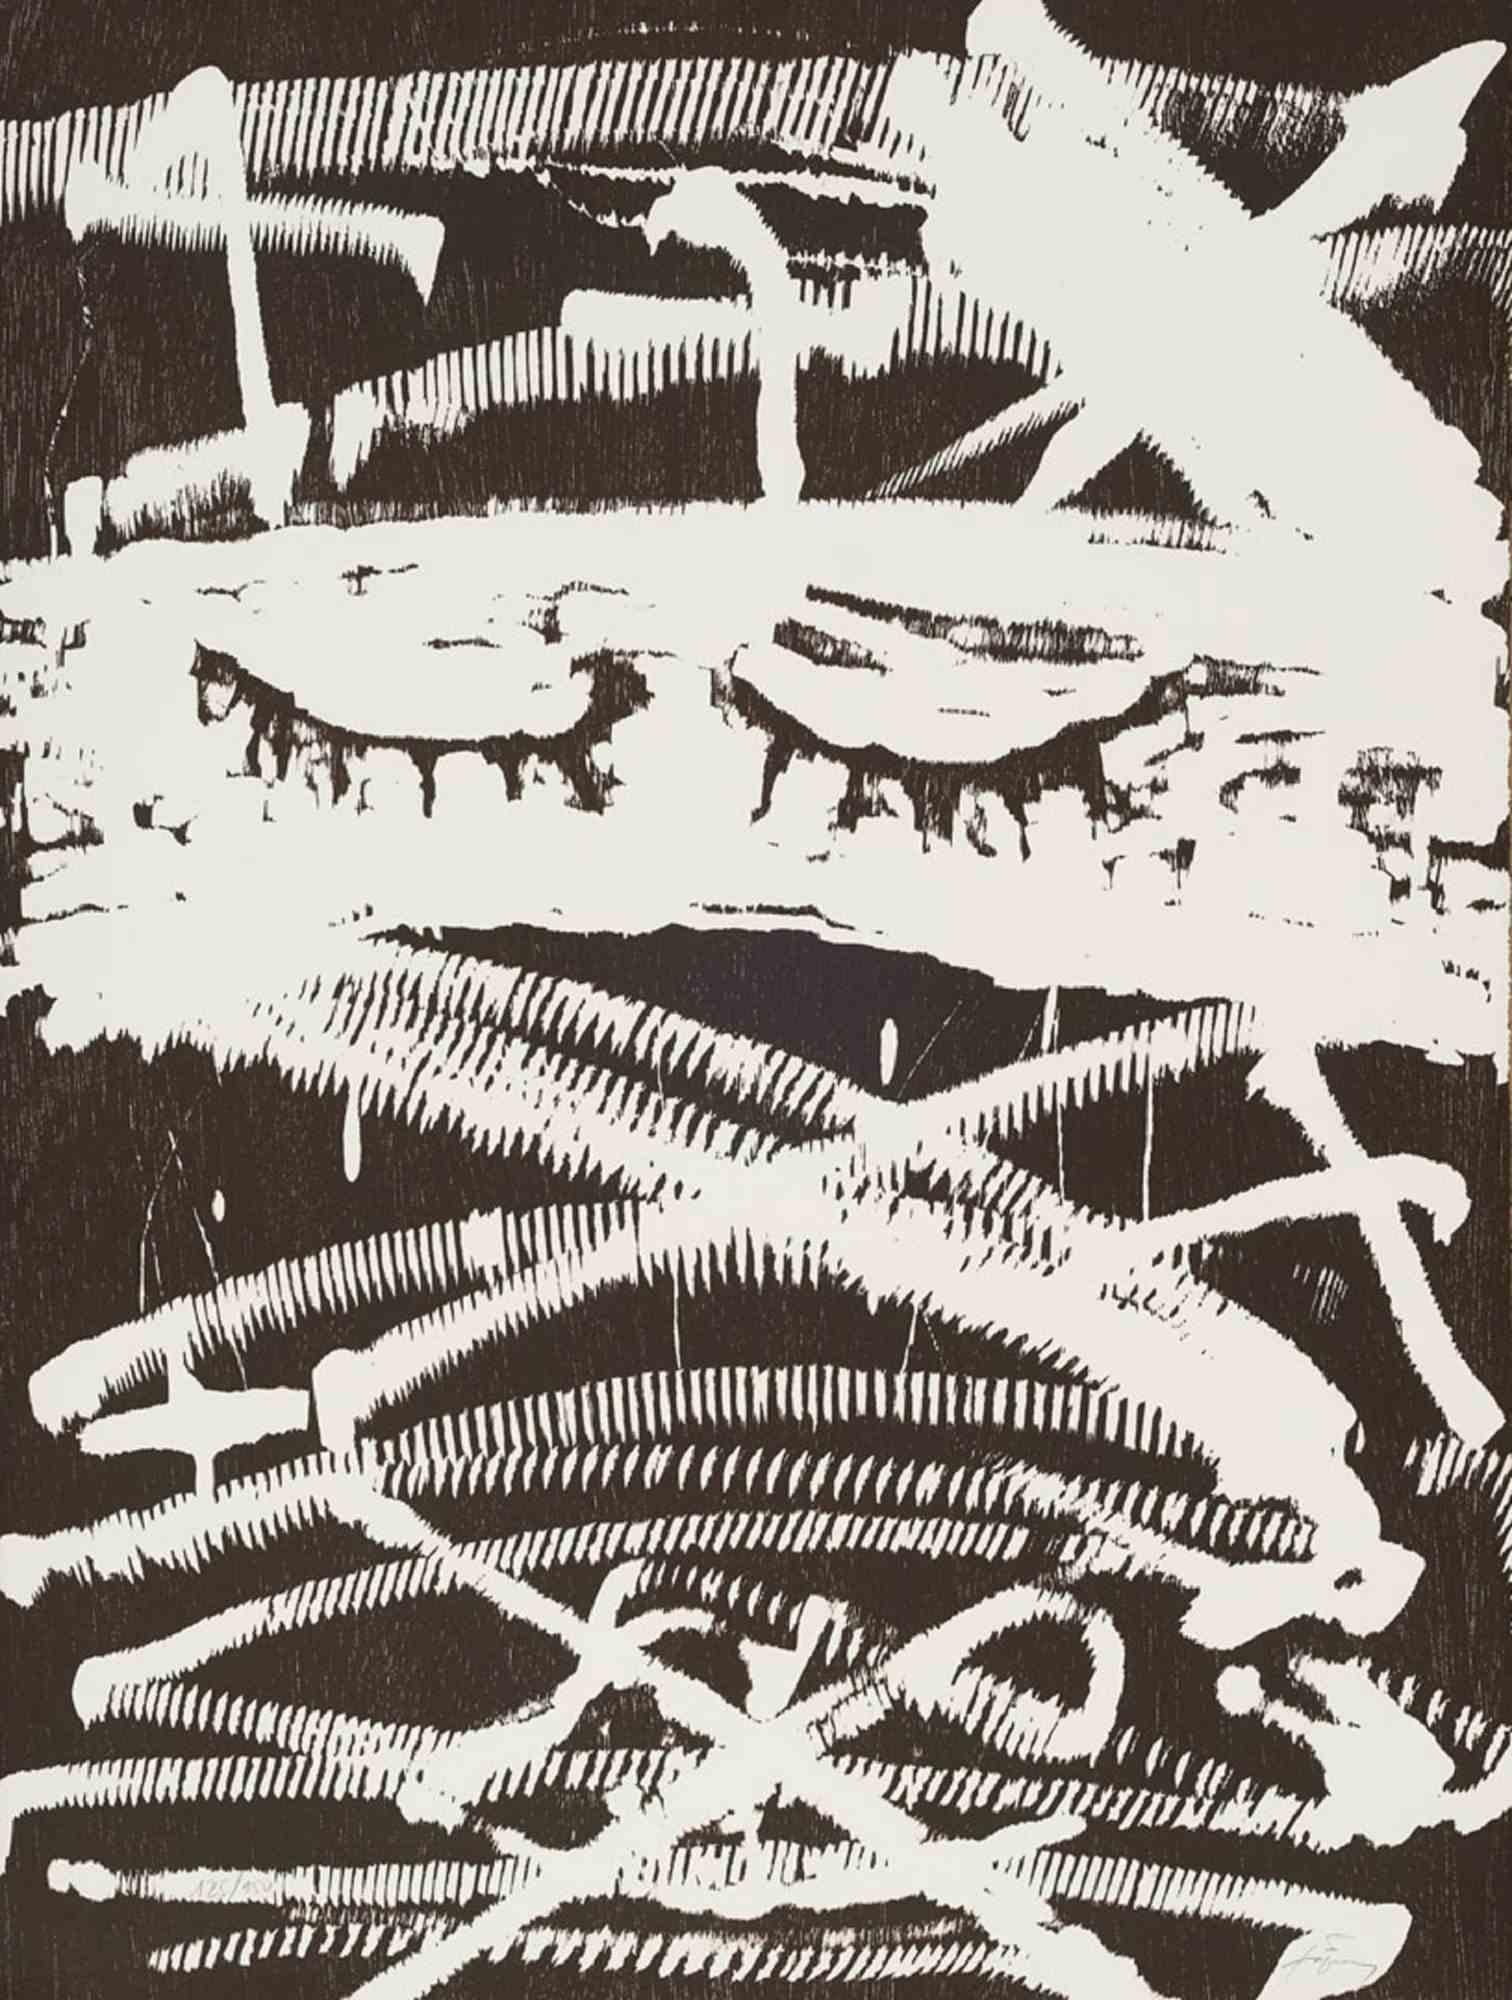 Antoni Tàpies Abstract Print - Untitled from Artists Against Torture - Woodcut by Antoni Tapies - 1993